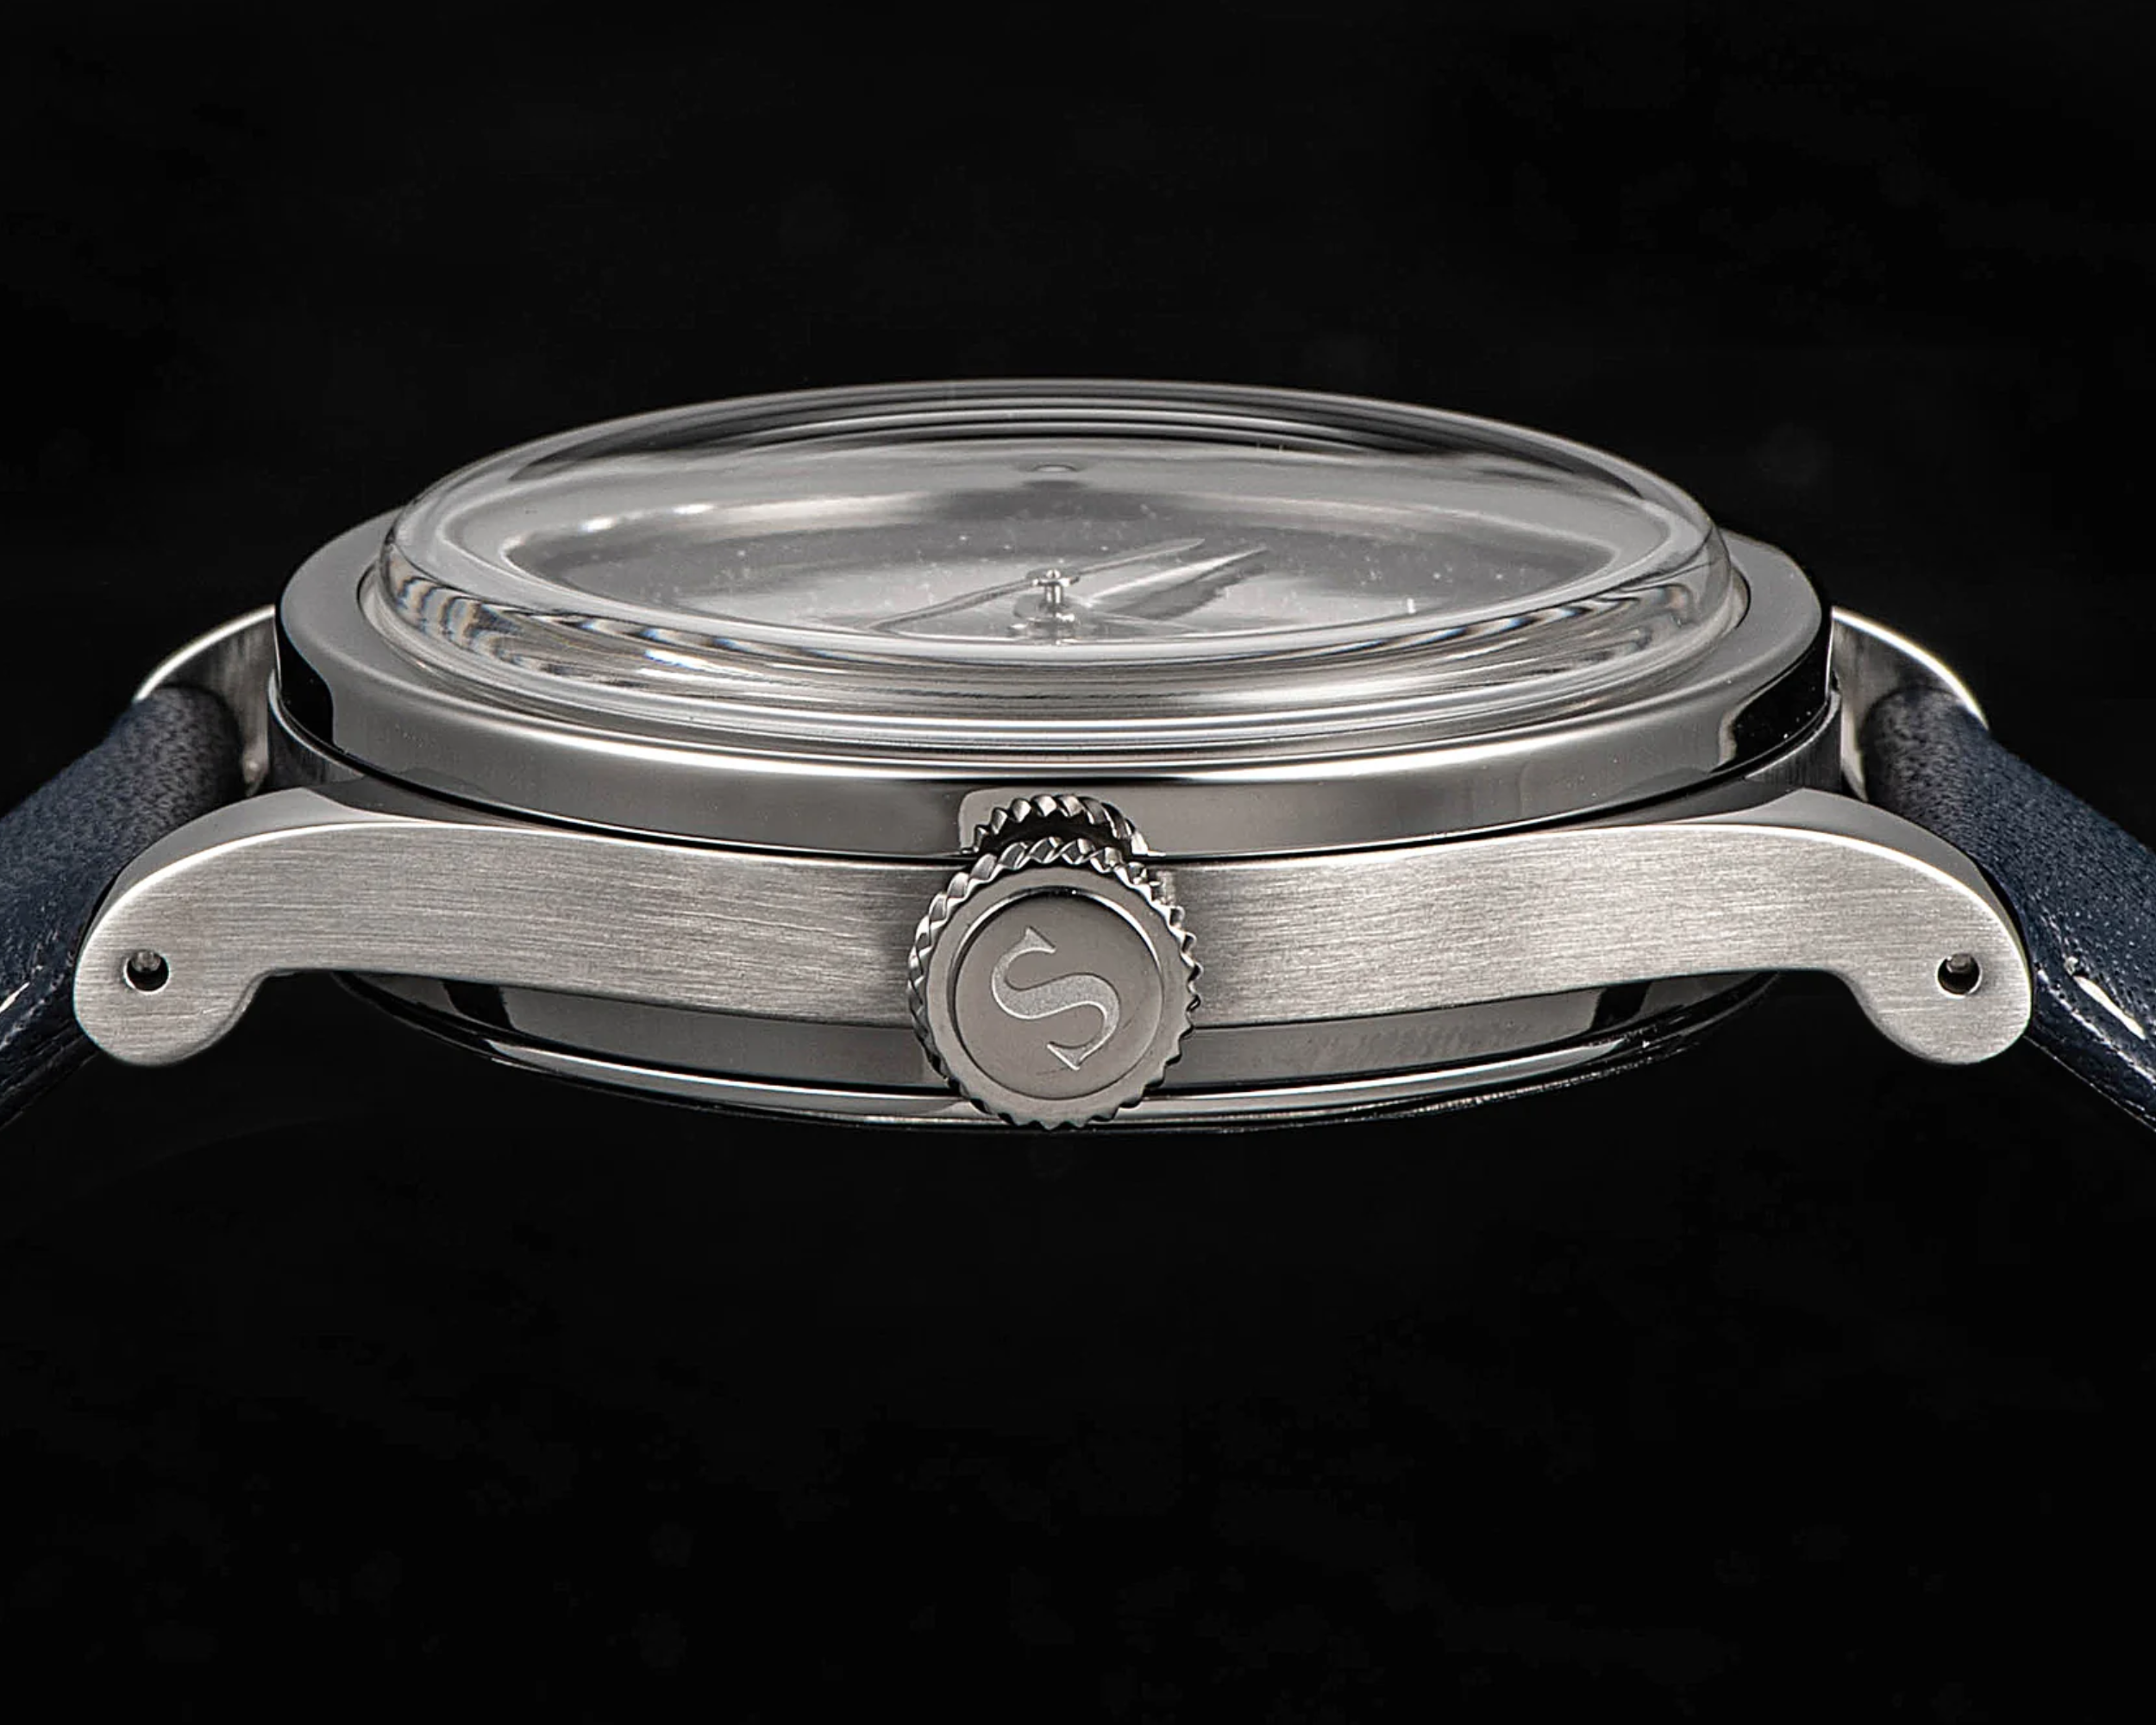 Sugess Heritage S411-3B Seagull 2130 Movement Stainless Steel Case Stars Dial SU4113BSTRS watch dream-watches.com india